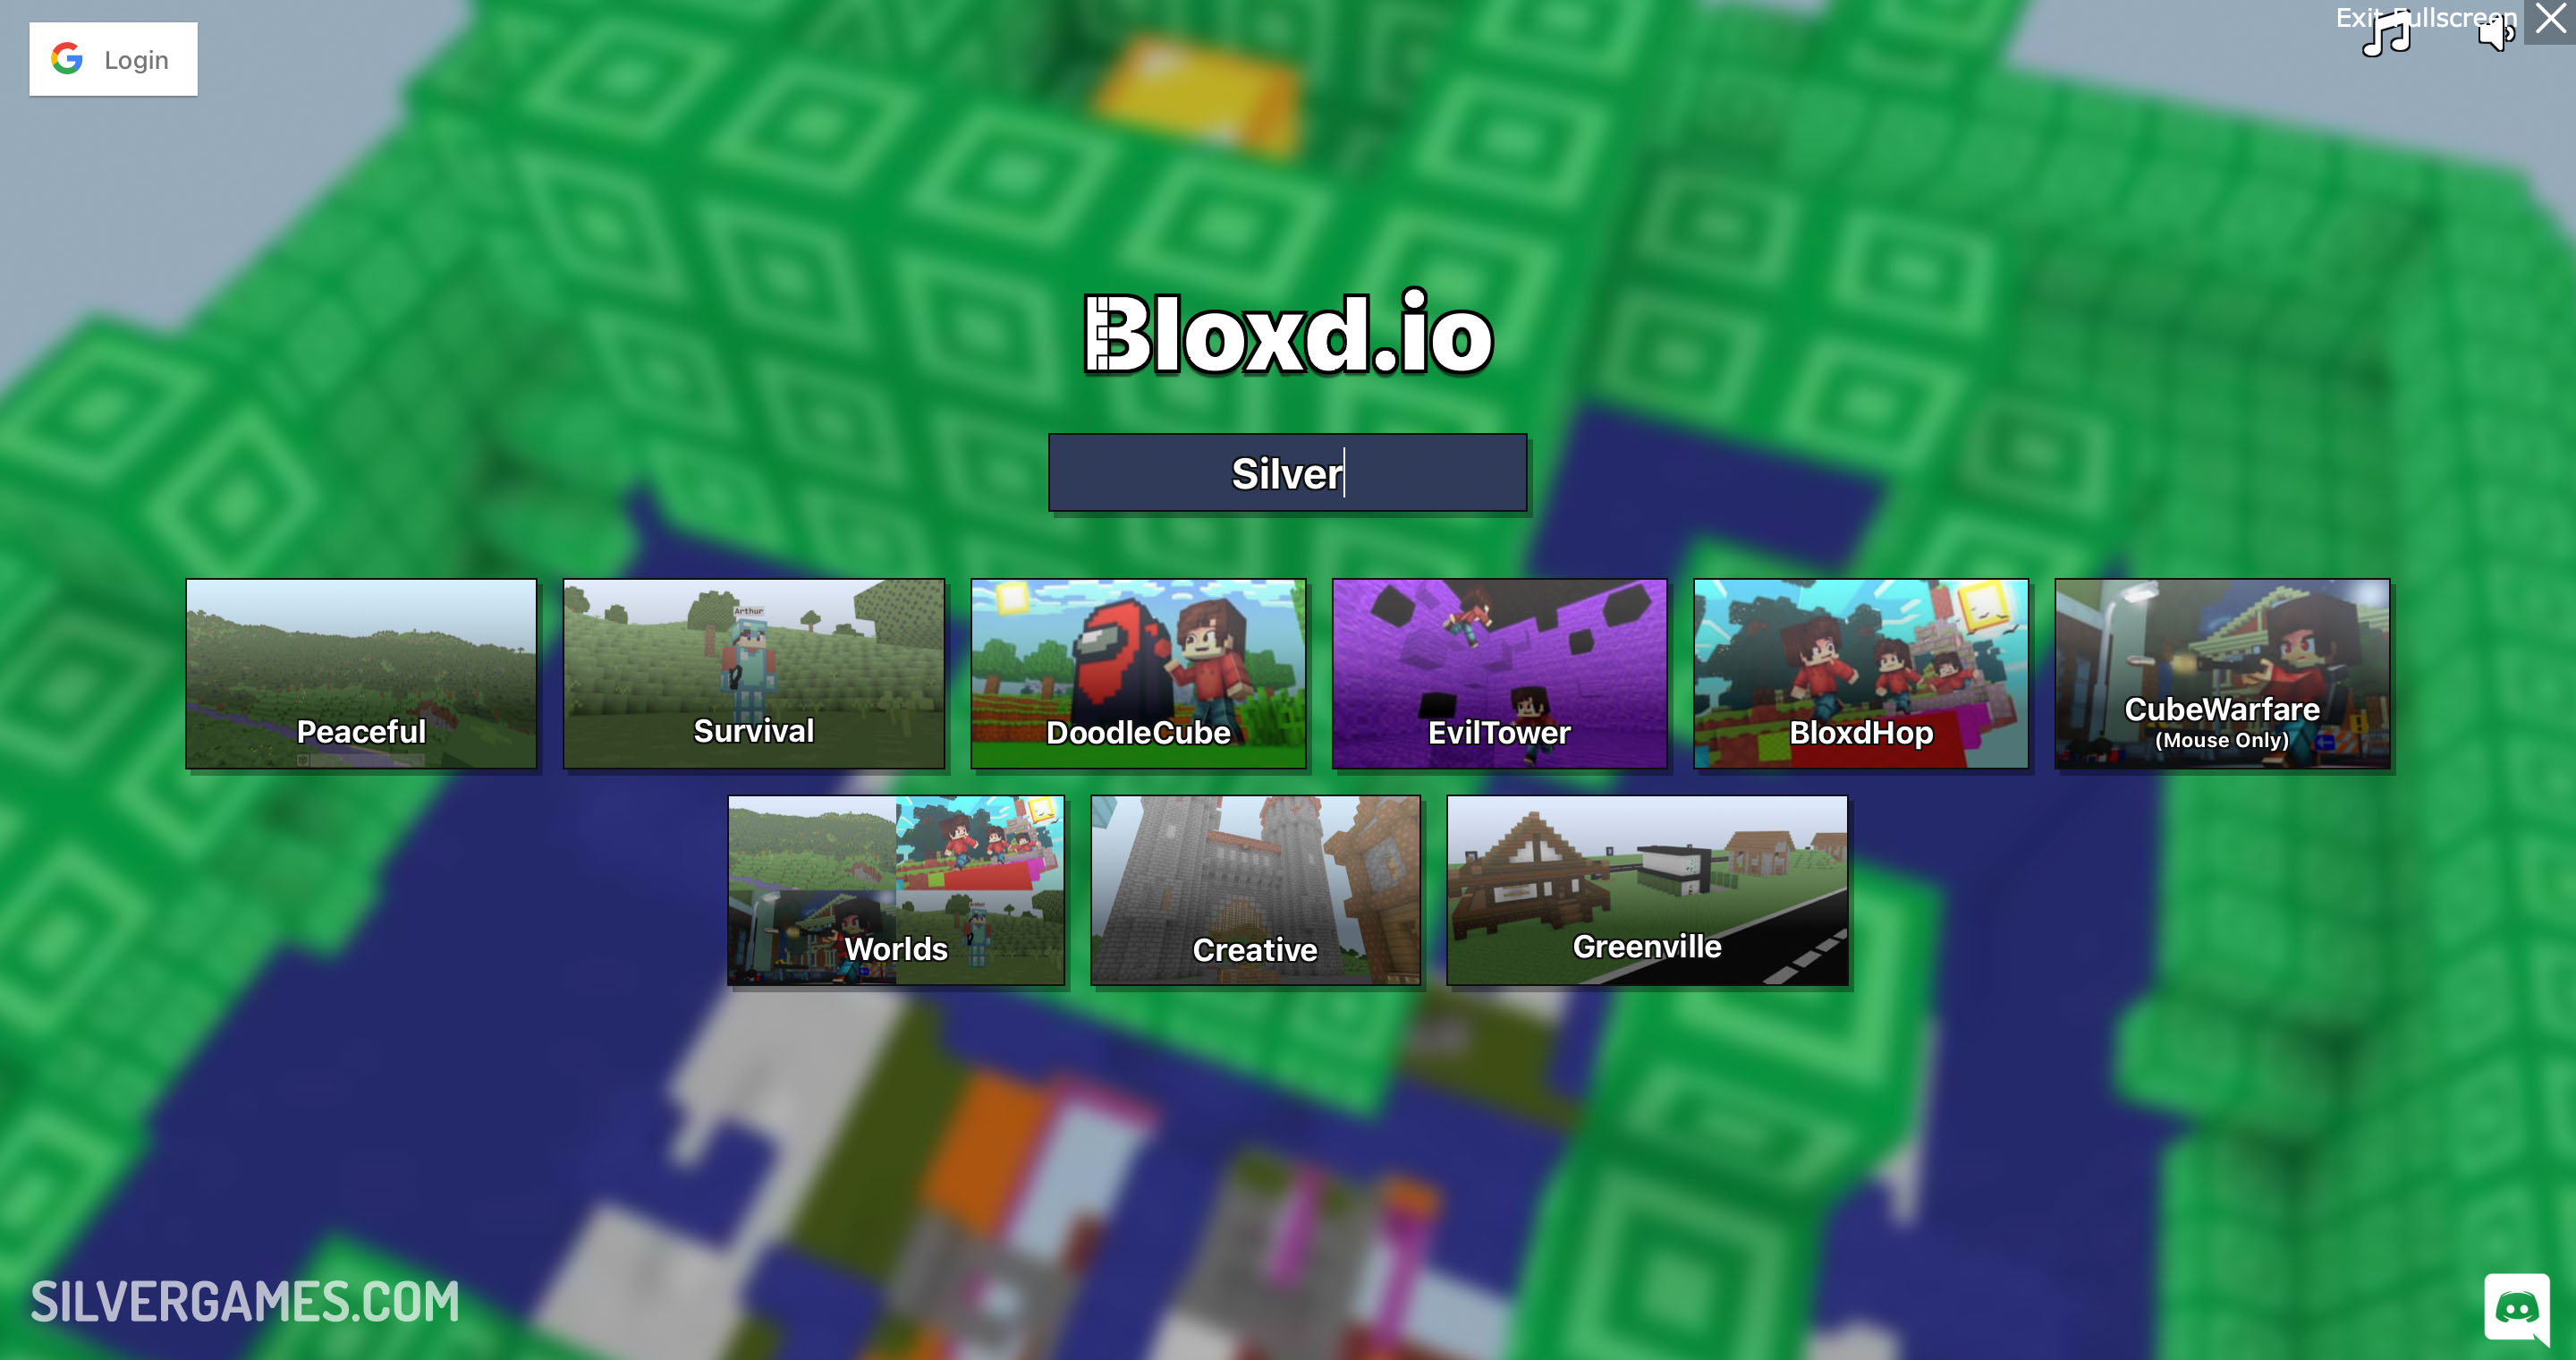 About: Bloxd.io Multiplayer (Google Play version)